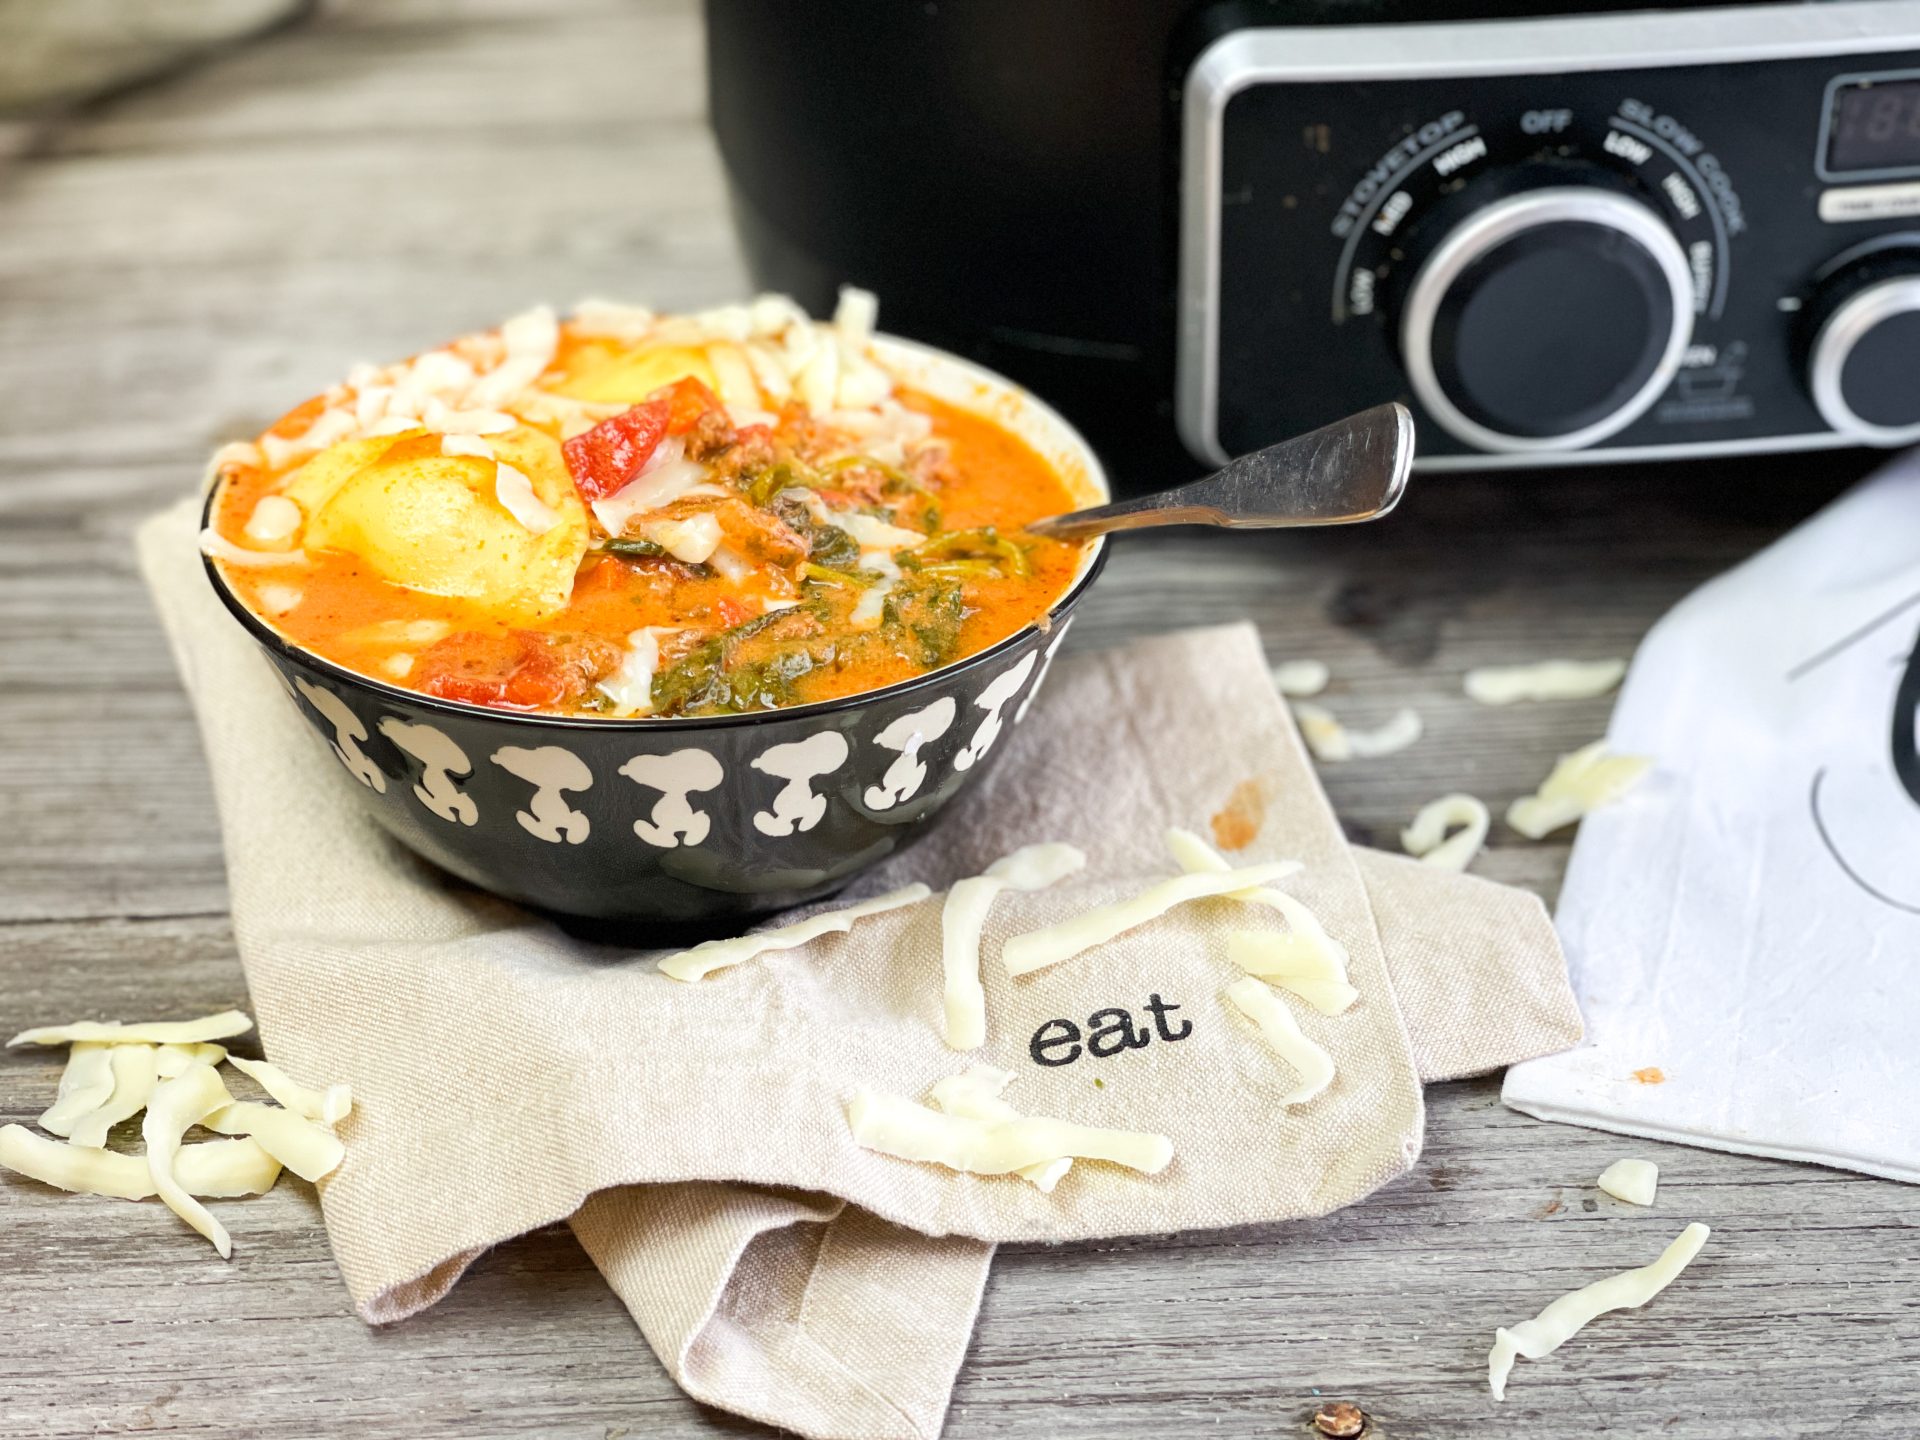 Easy Crockpot Sausage Ravioli Soup from Farmwife Feeds - a slow cooker hearty soup full of flavor, classic lasagna flavors in a warm bowl. #soup #crockpot #slowcooker #ravioli